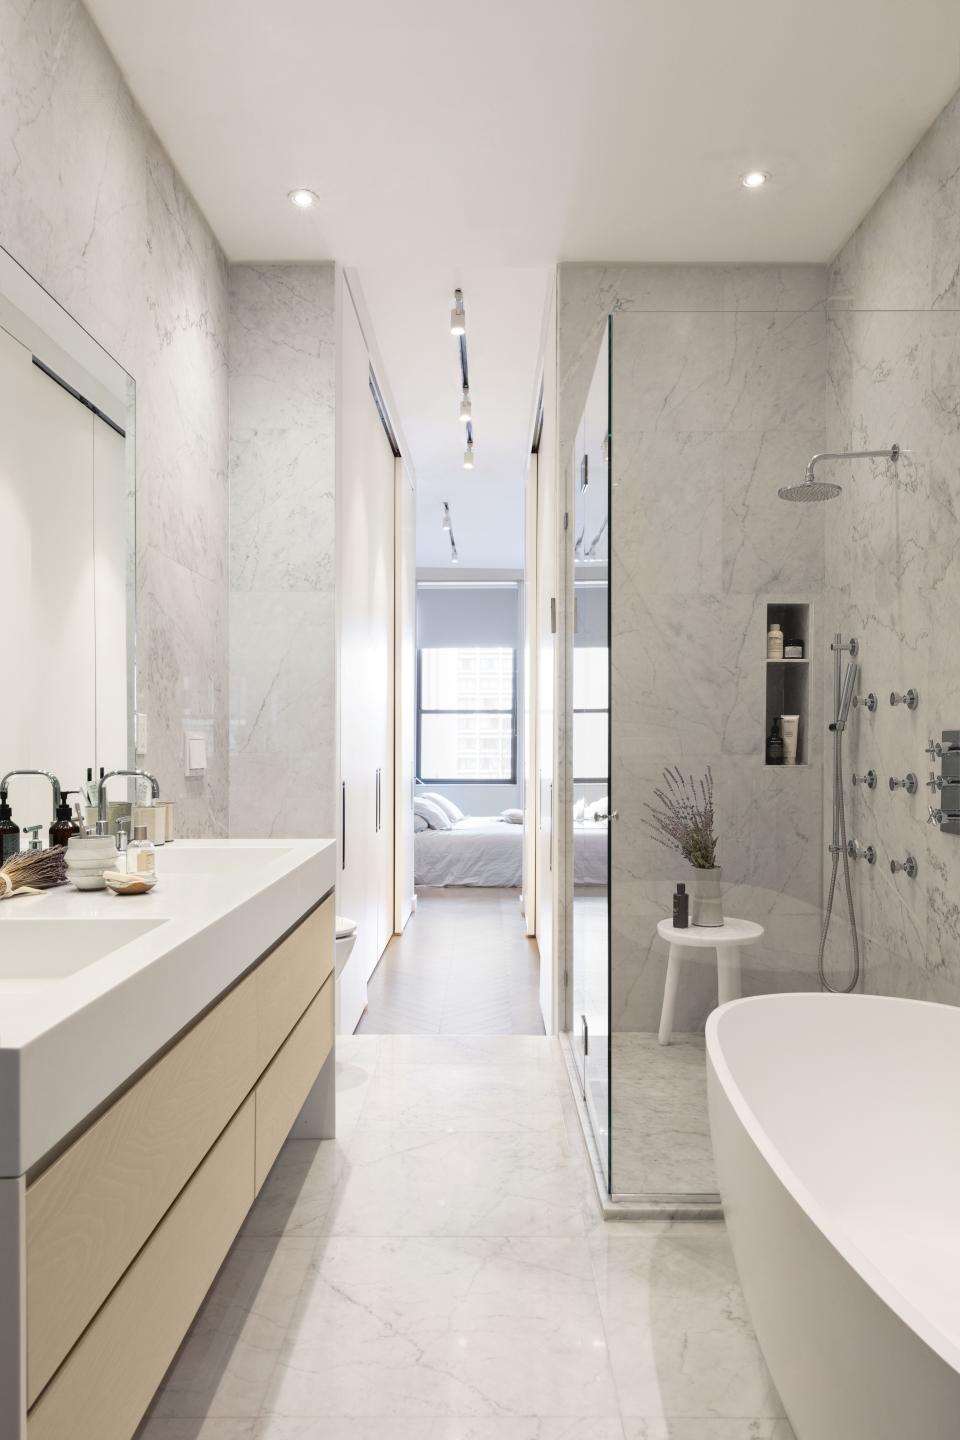 The master bath is dominated by richly veined Carrara marble.